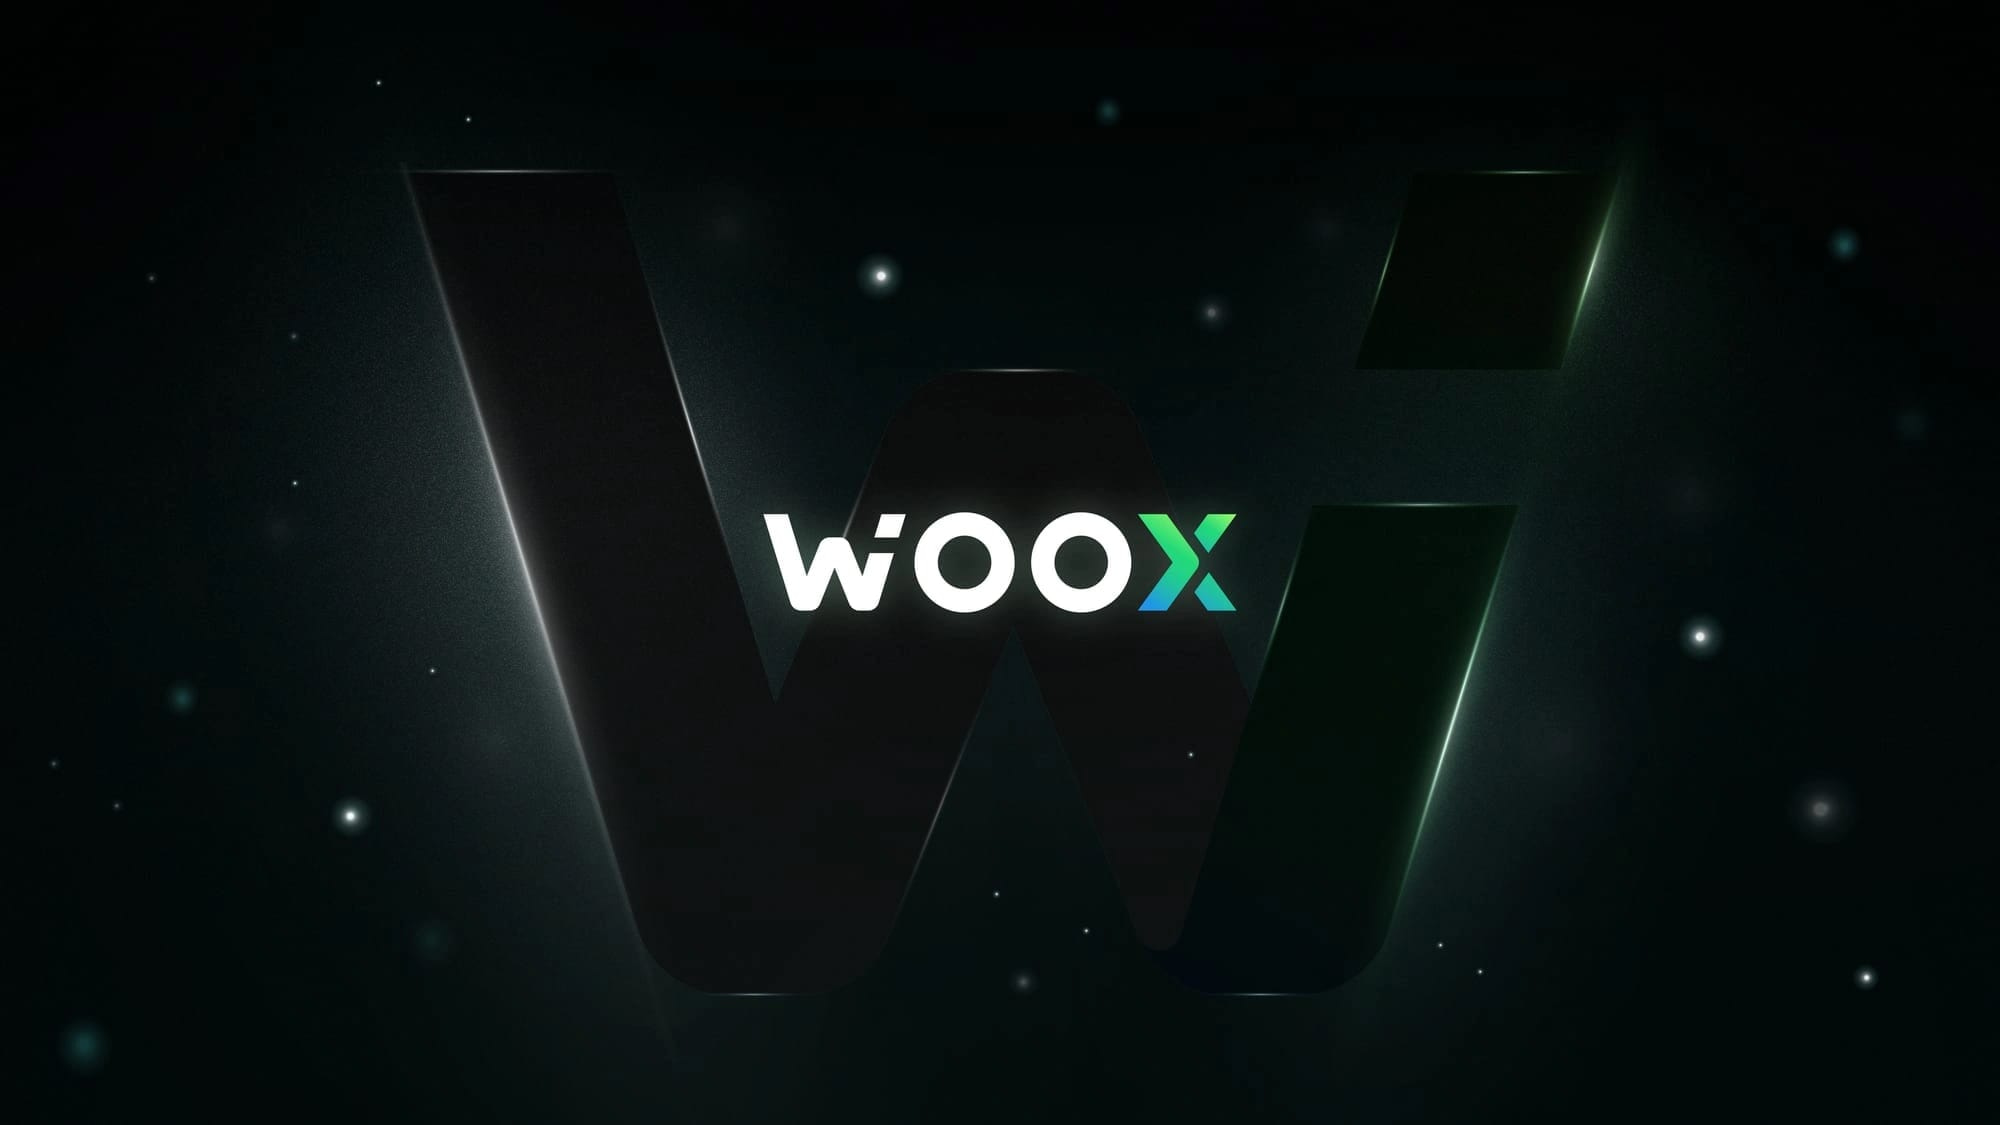 WOO launches an innovation hub with an initial focus on the BTC ecosystem and diversifying across top growth verticals